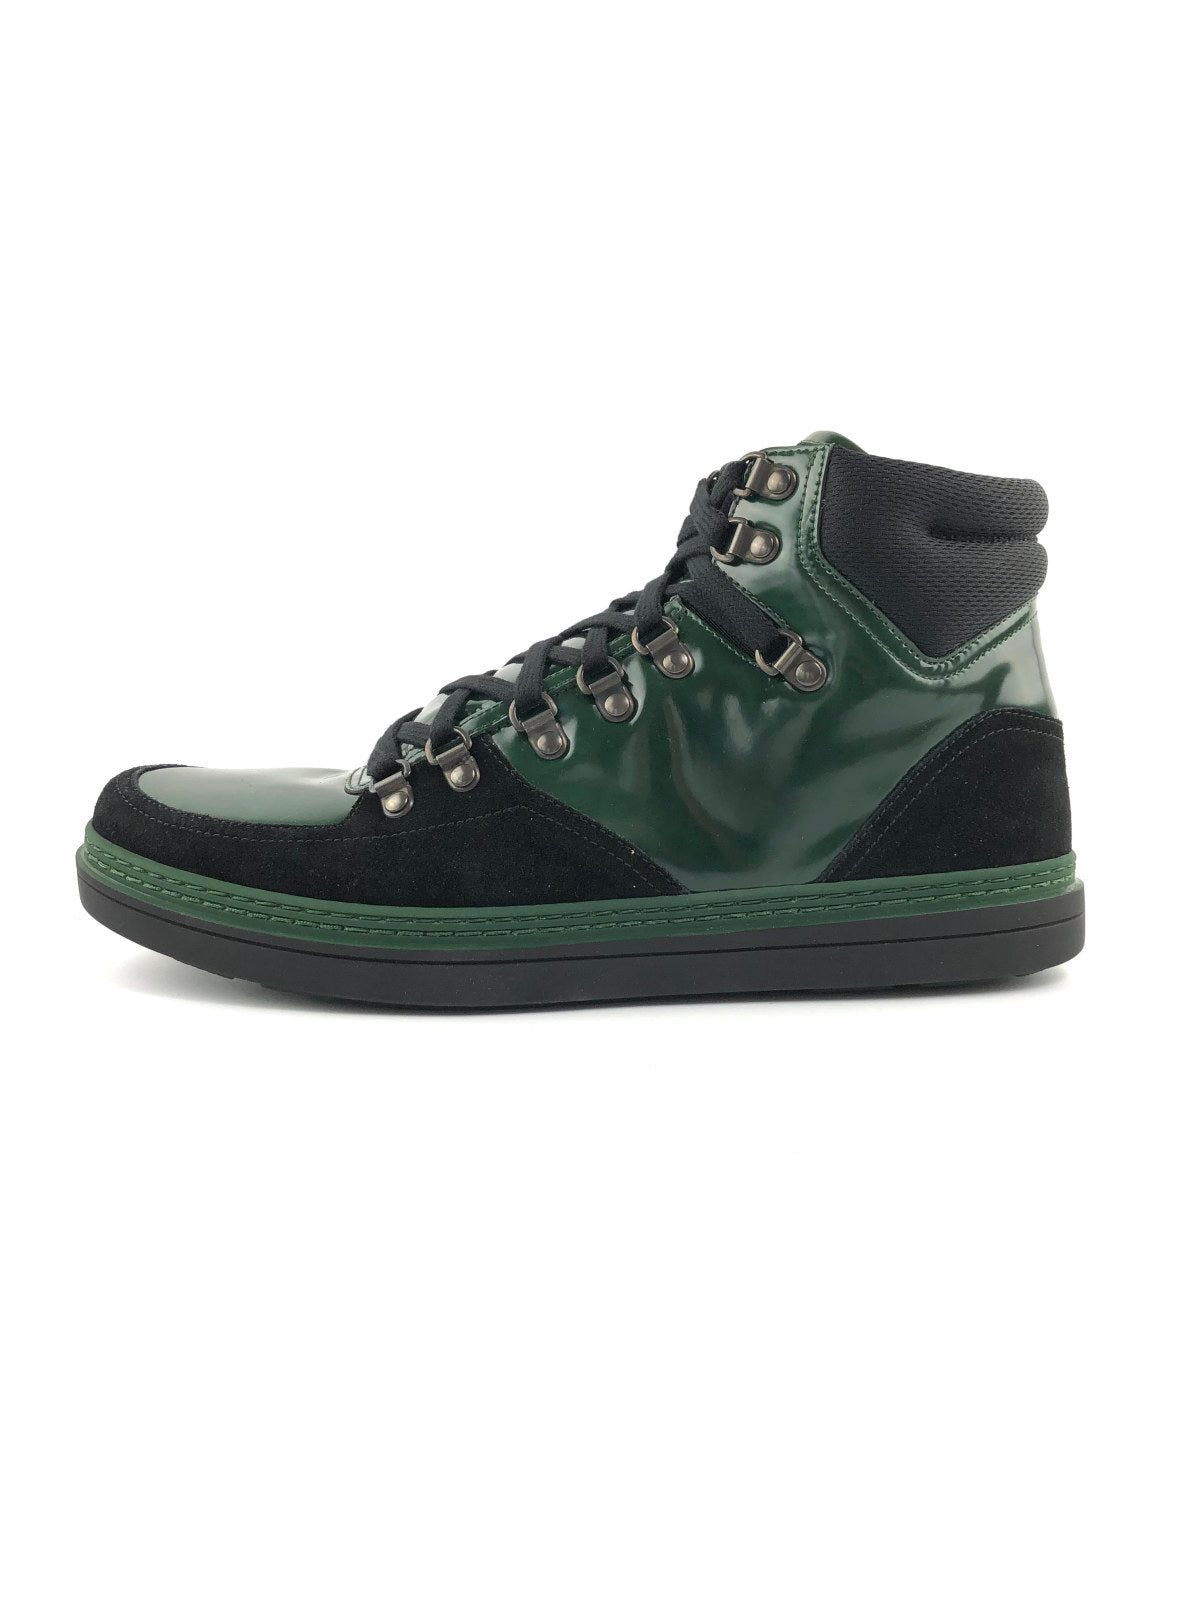 GUCCI Dark Green Suede Contrast Combo MENS High Top Sneakers Size 8 - The  Purse Ladies